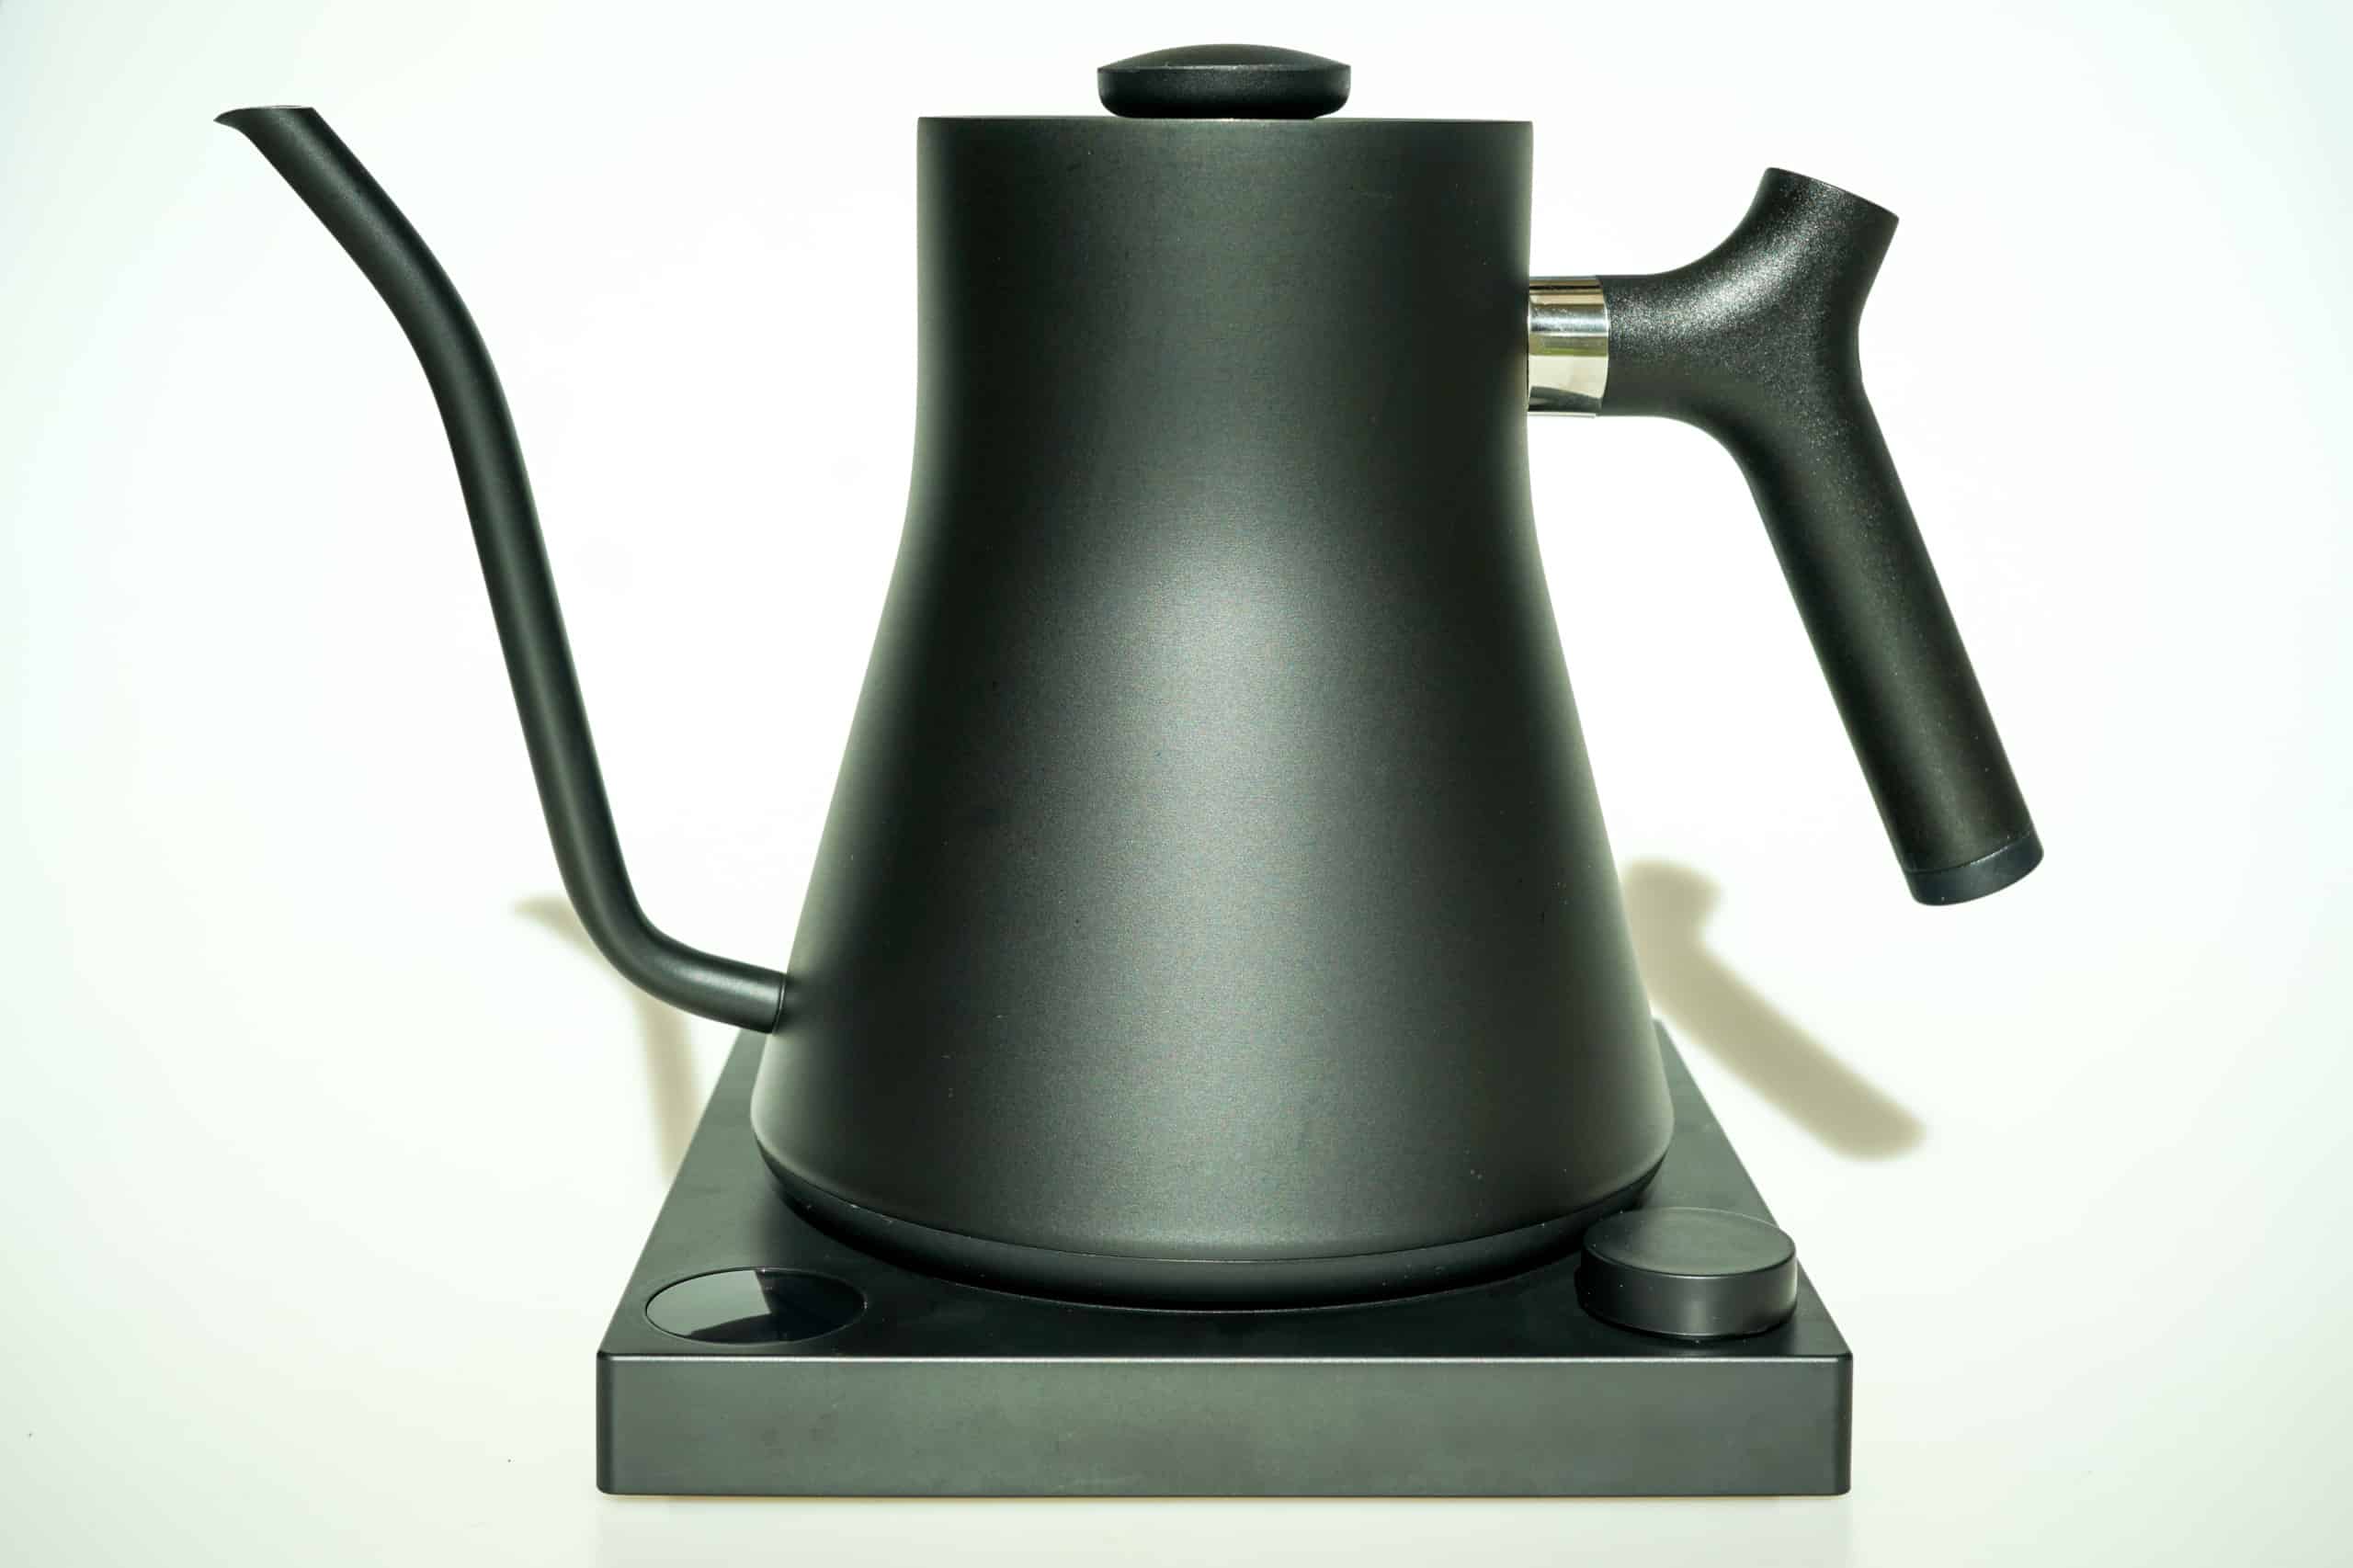 https://www.coffeereview.com/wp-content/uploads/2020/03/Stagg-Kettle-scaled.jpg